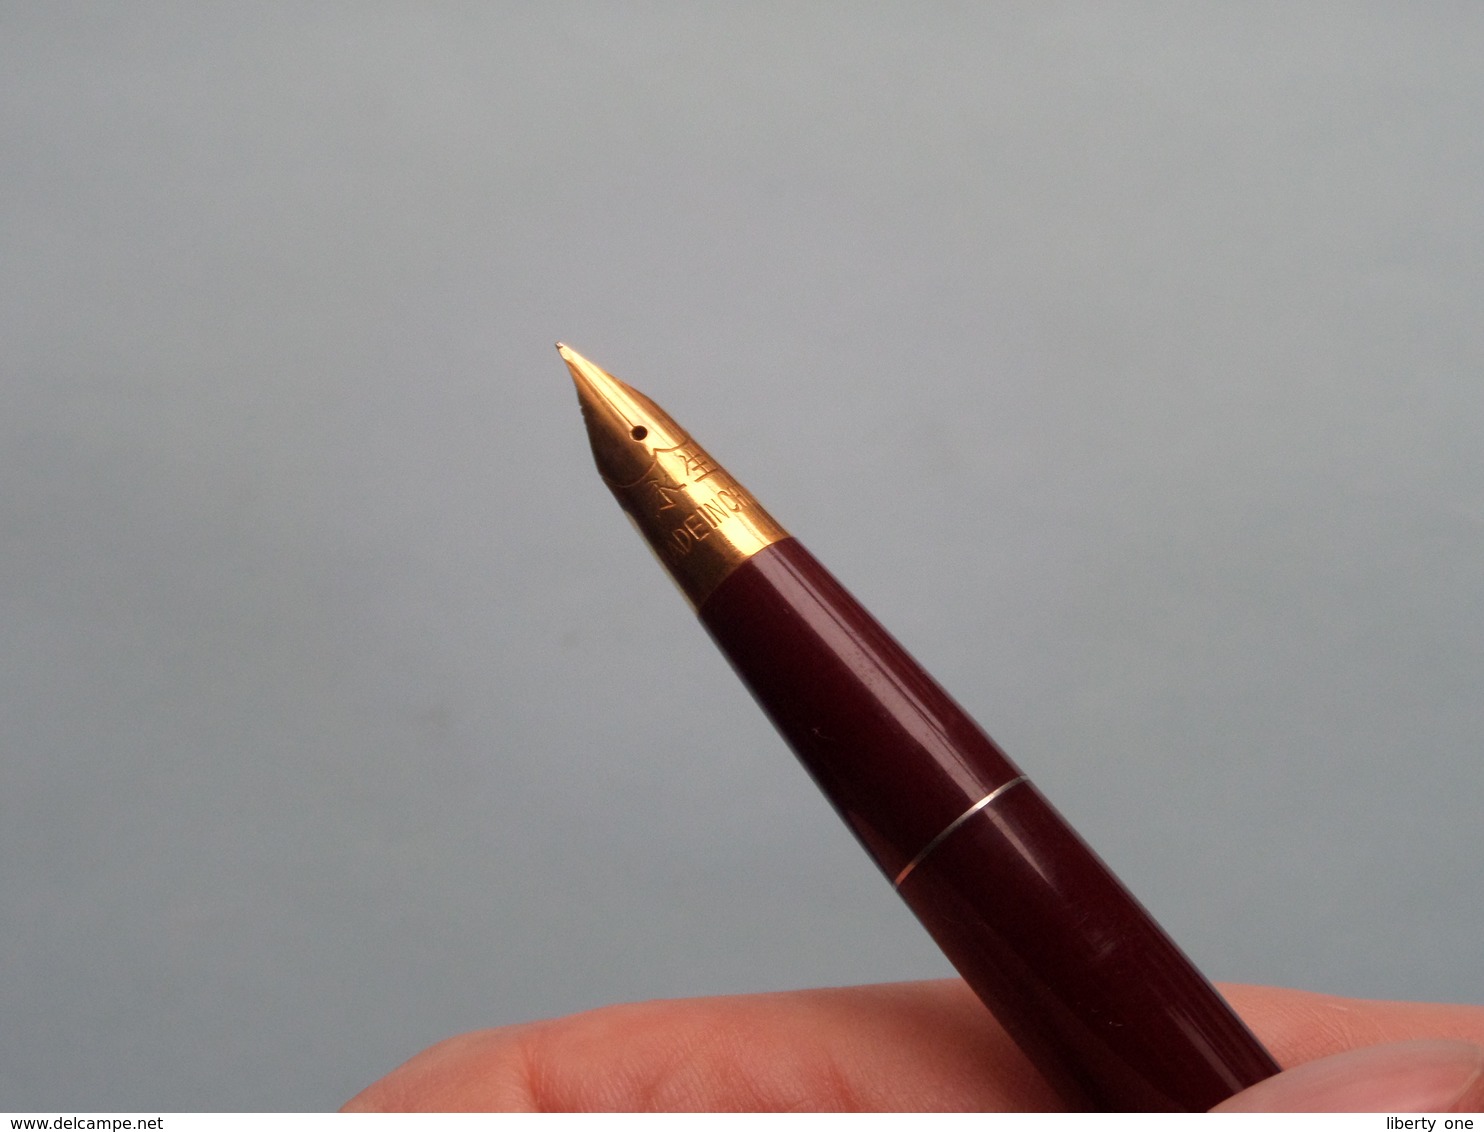 VULPEN - STYLO ( Fountain Pen / Ink - Encre - Inkt ) 14 Cm. / 17 Gram. ( Made In China > WING SUNG - 727 ) ! - Vulpen